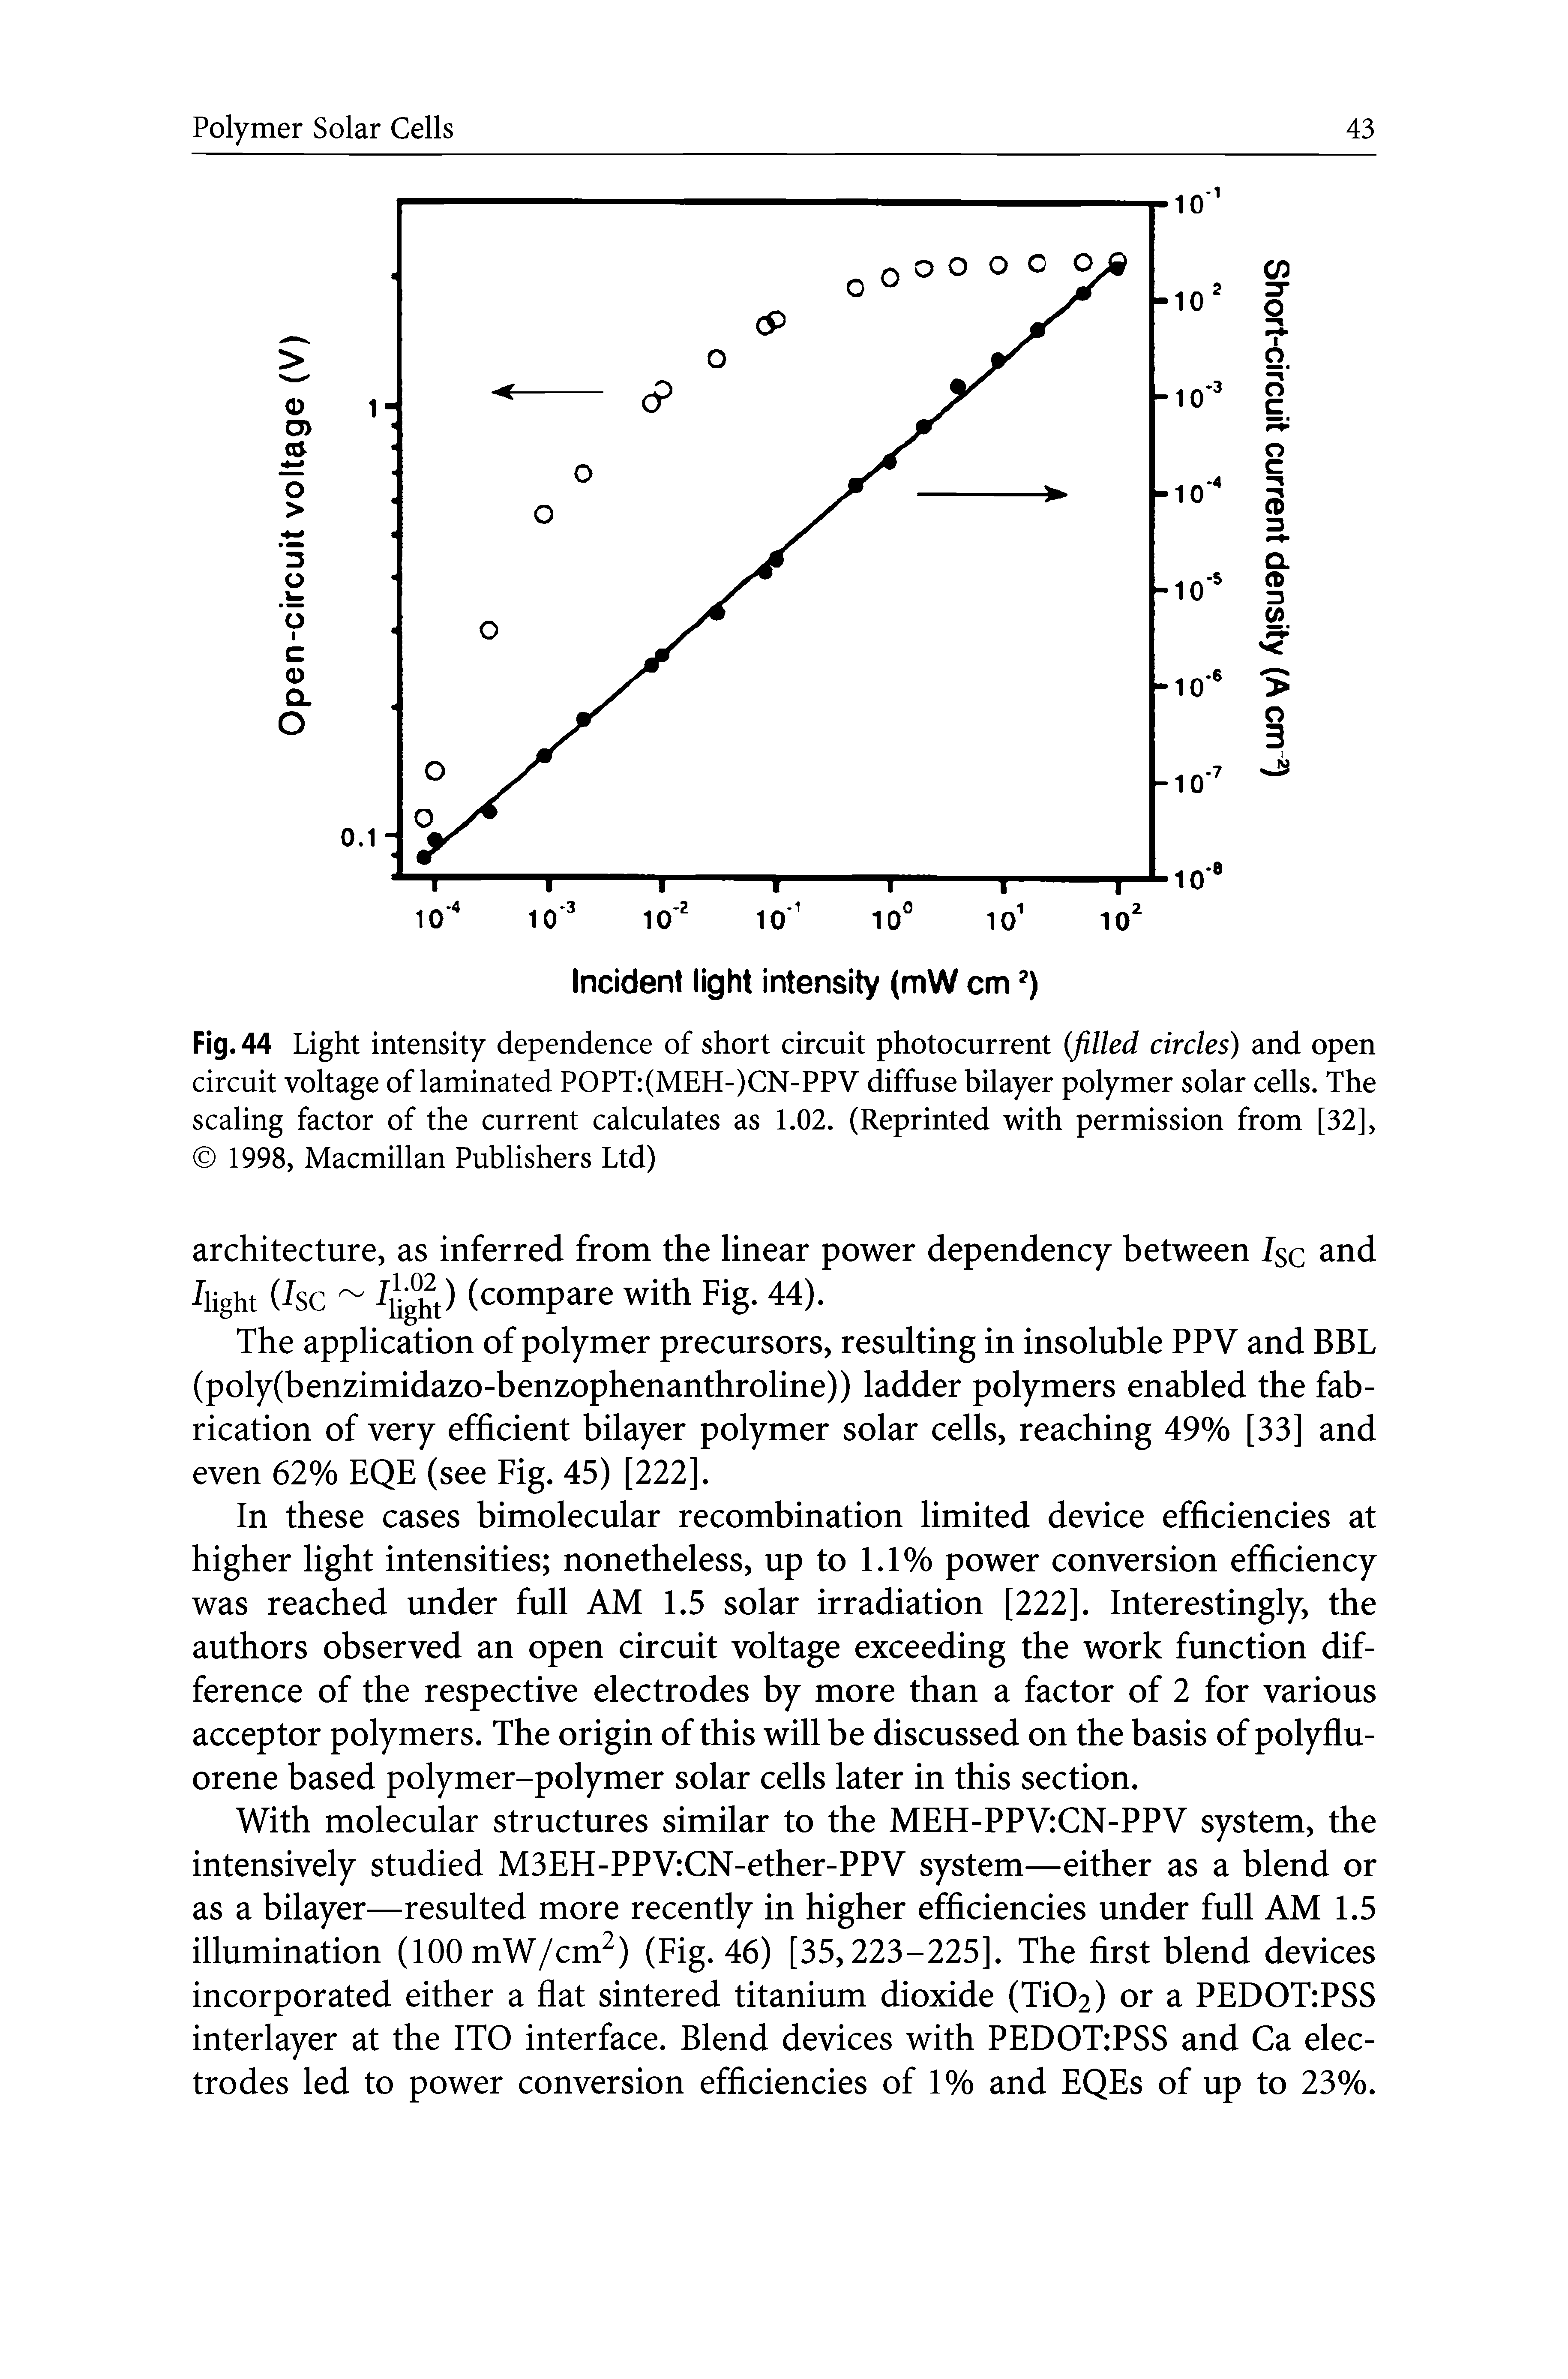 Fig. 44 Light intensity dependence of short circuit photocurrent (filled circles) and open circuit voltage of laminated POPT (MEH-)CN-PPV diffuse bilayer polymer solar cells. The scaling factor of the current calculates as 1.02. (Reprinted with permission from [32], 1998, Macmillan Publishers Ltd)...